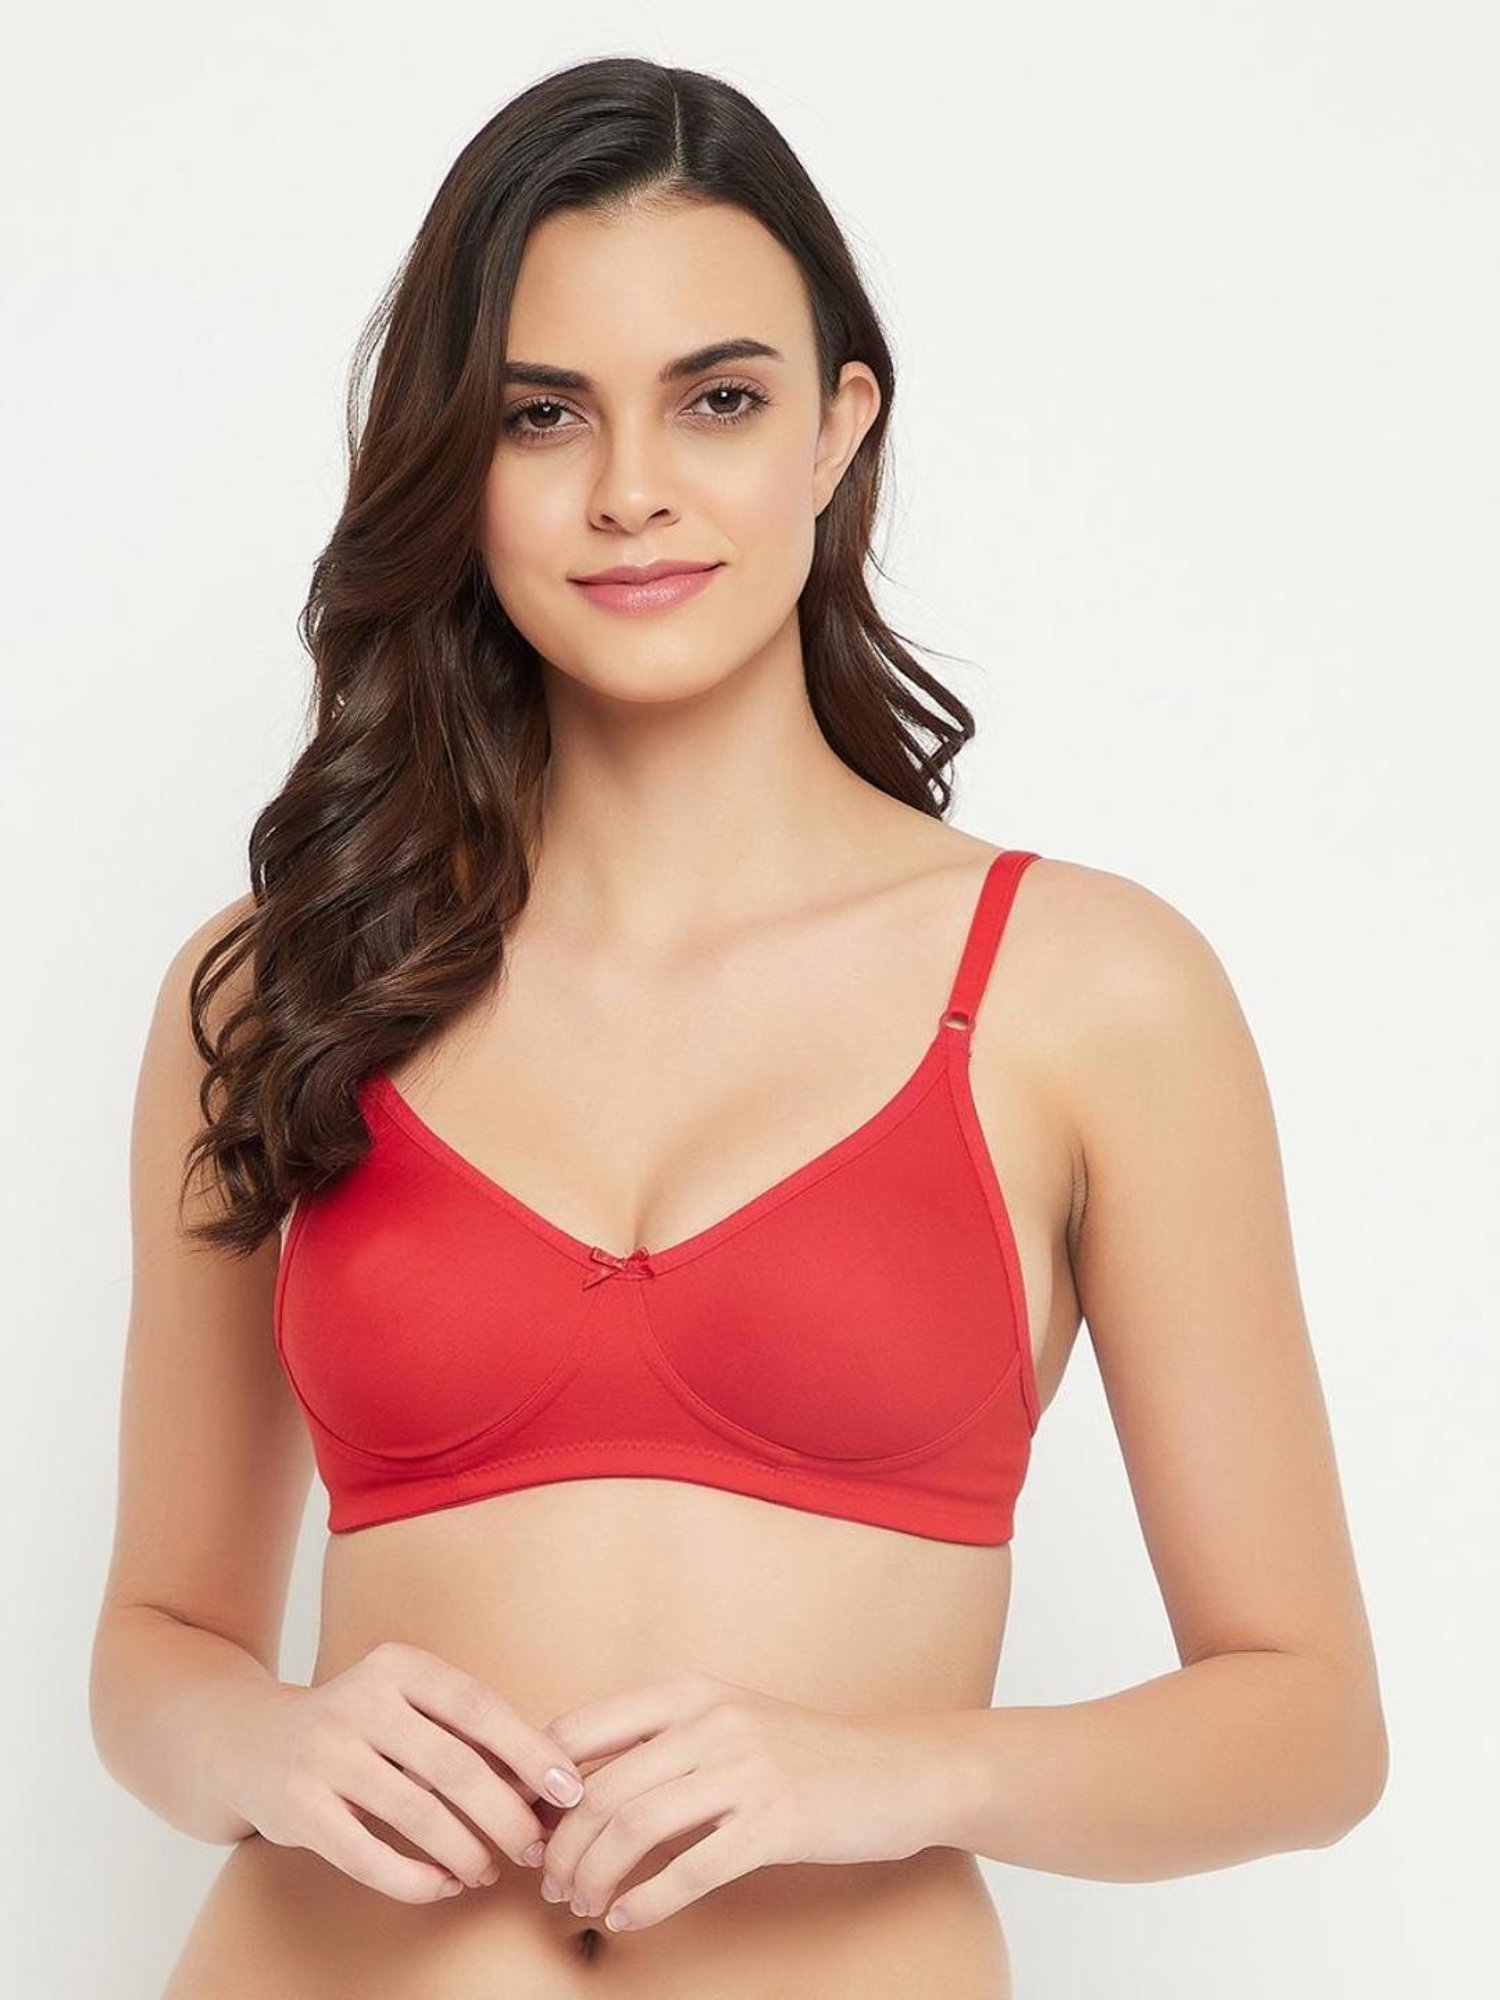 Buy Clovia Lace Solid Padded Full Cup Wire Free Bralette Bra - Red